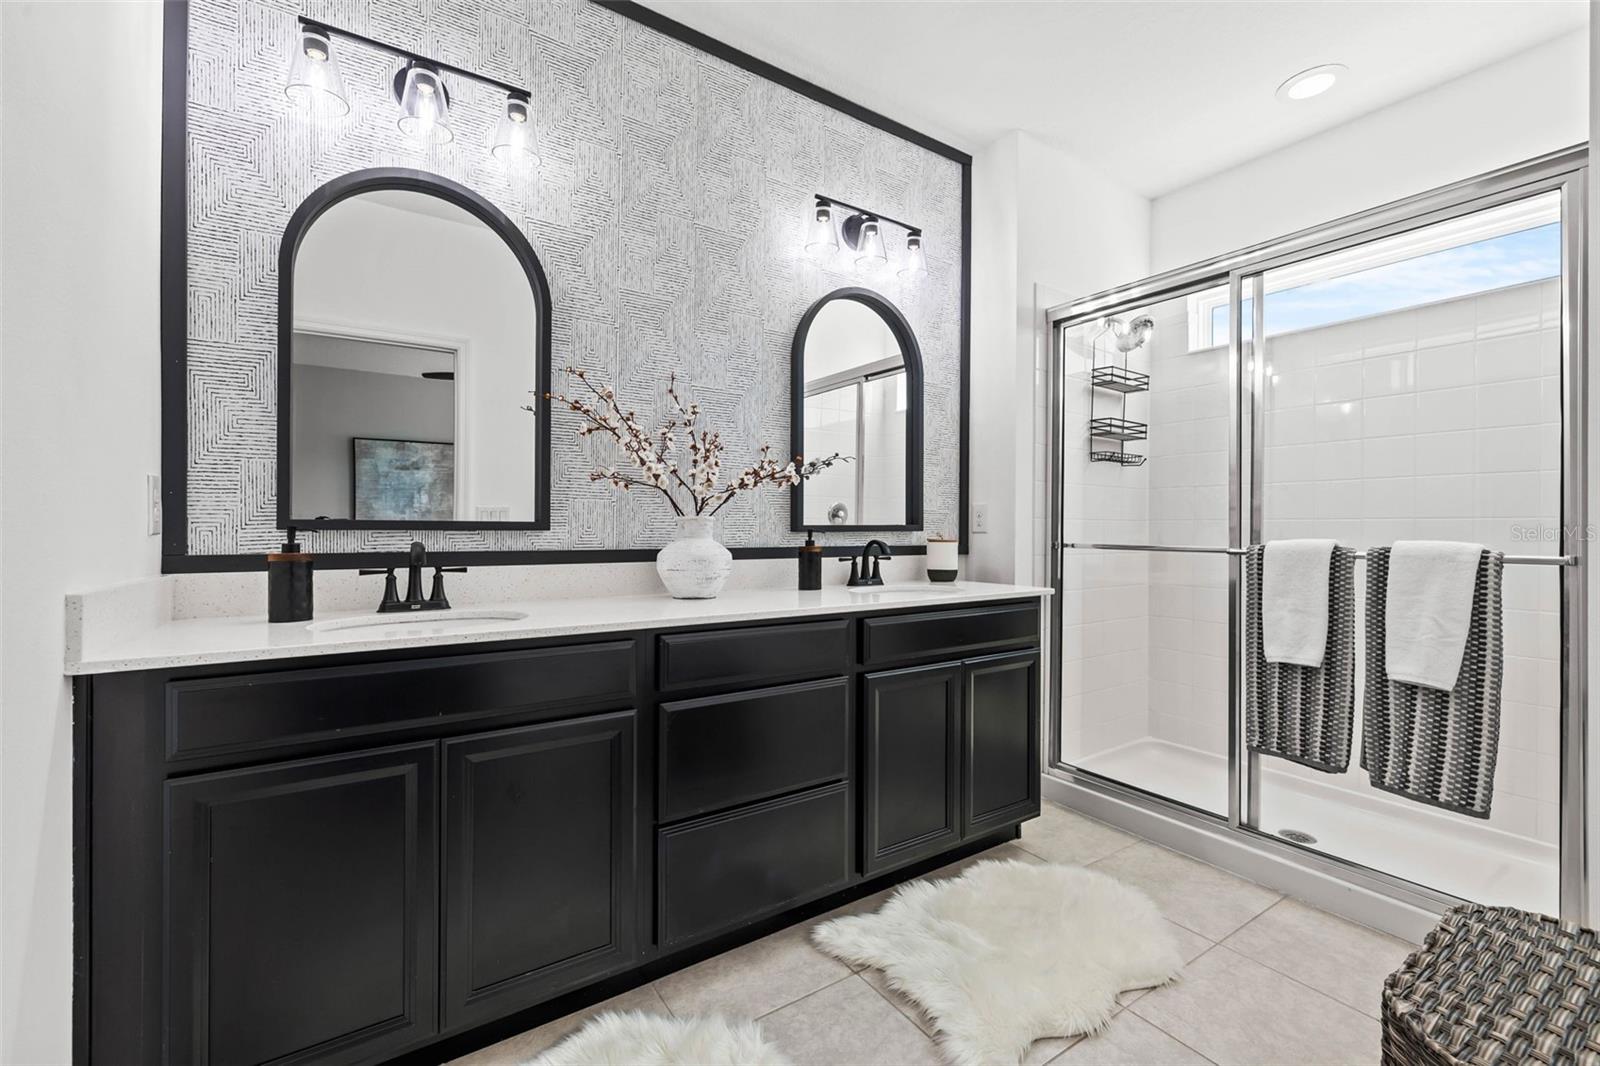 Primary Bathroom featuring private water closet, custom mirrors, faucet upgrades, upgraded light fixtures, tiled shower, and design wall papered wall for a modern  aesthetic